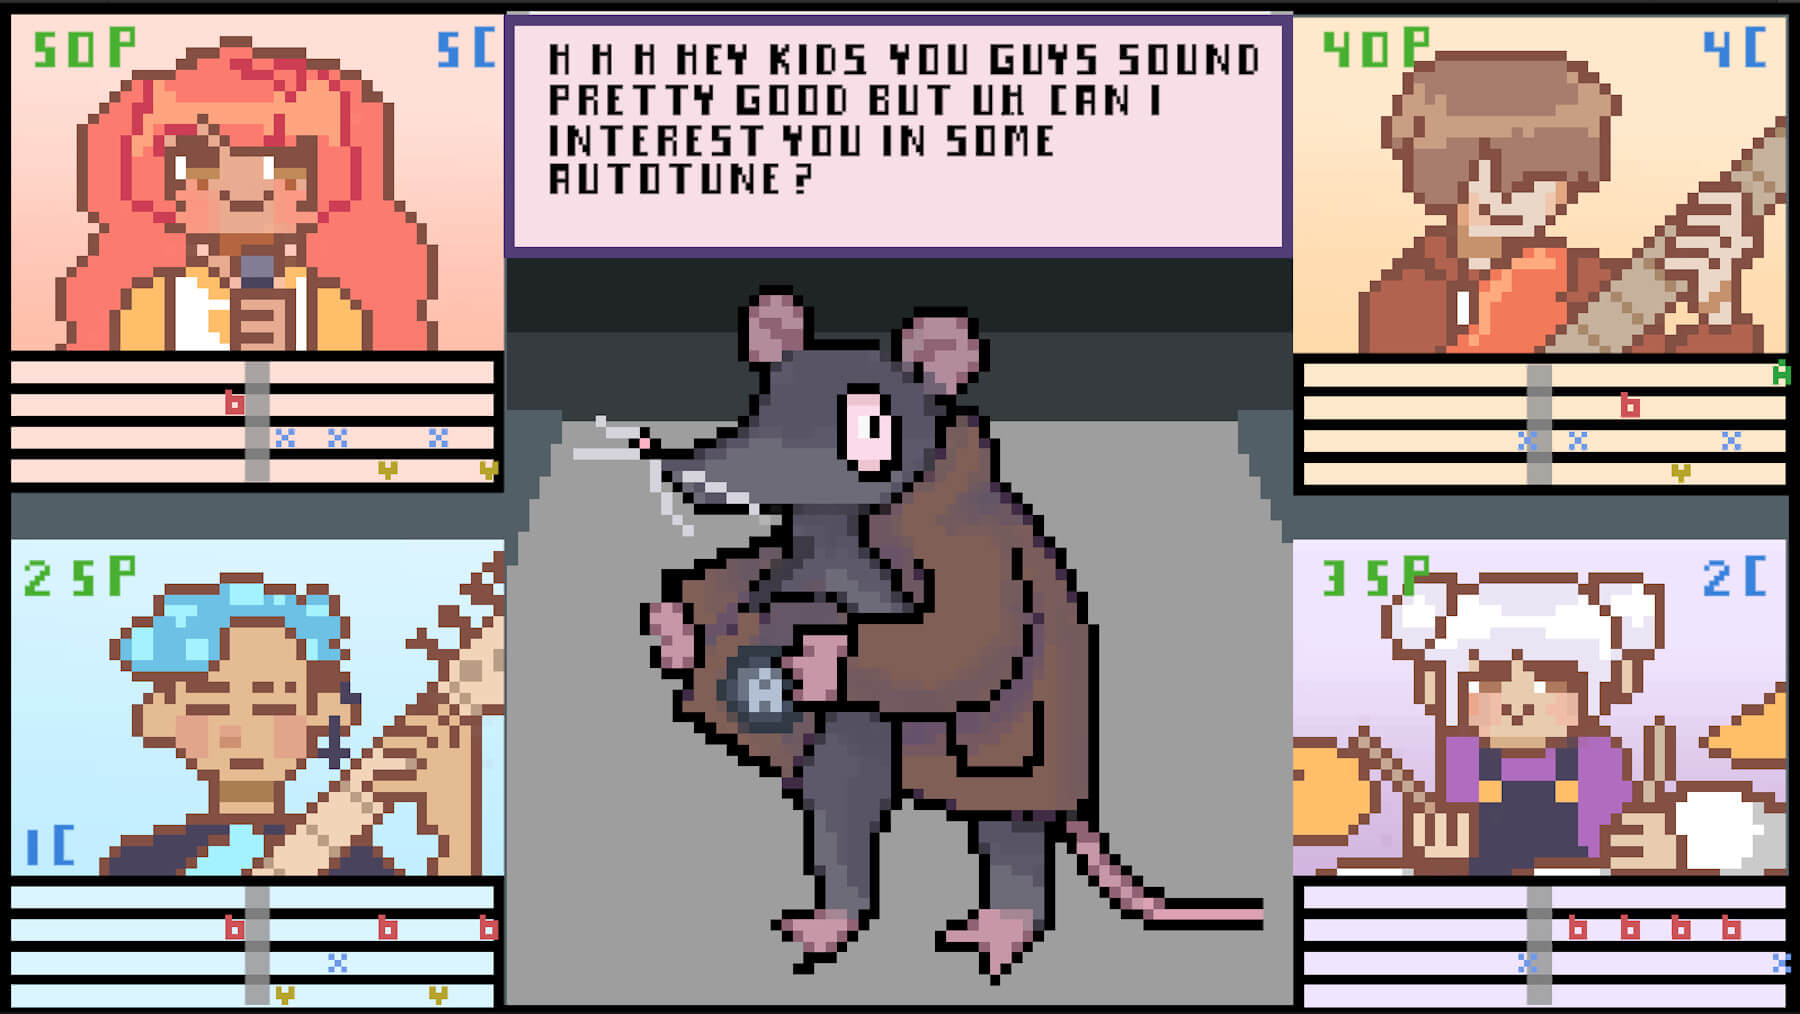 Game screenshot of four rock band musicians rehearsing a song while a rat character speaks to the group